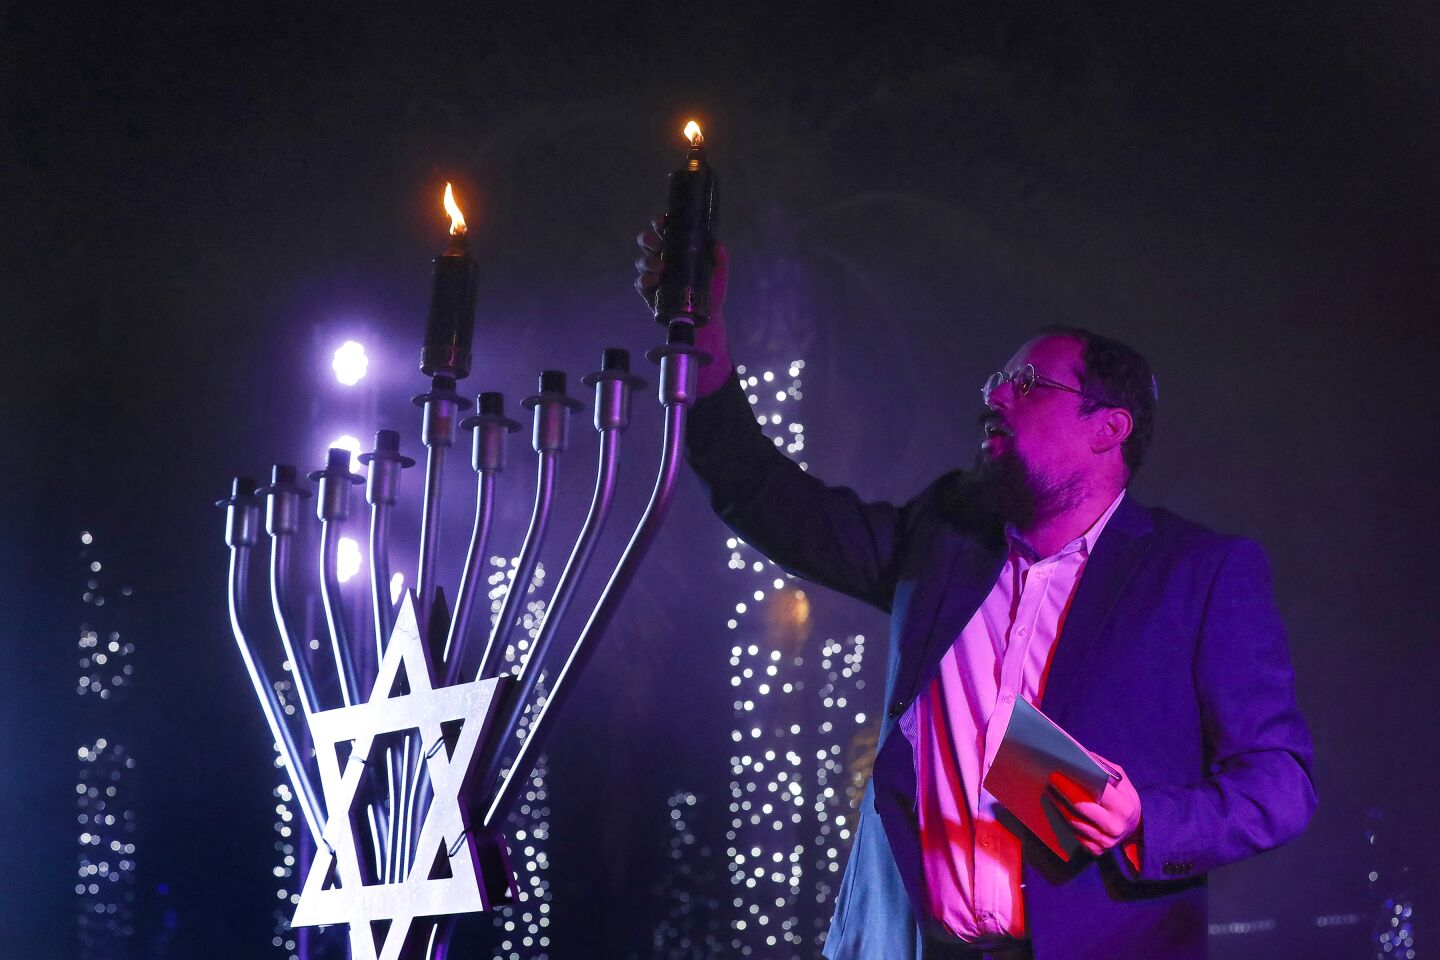 Rabbi Yossi Tiefenbrun of Chabad of Pacific Beach lights the menorah candle signifying the first night of Hanukkah on Nov. 28 at Liberty Station in Point Loma.